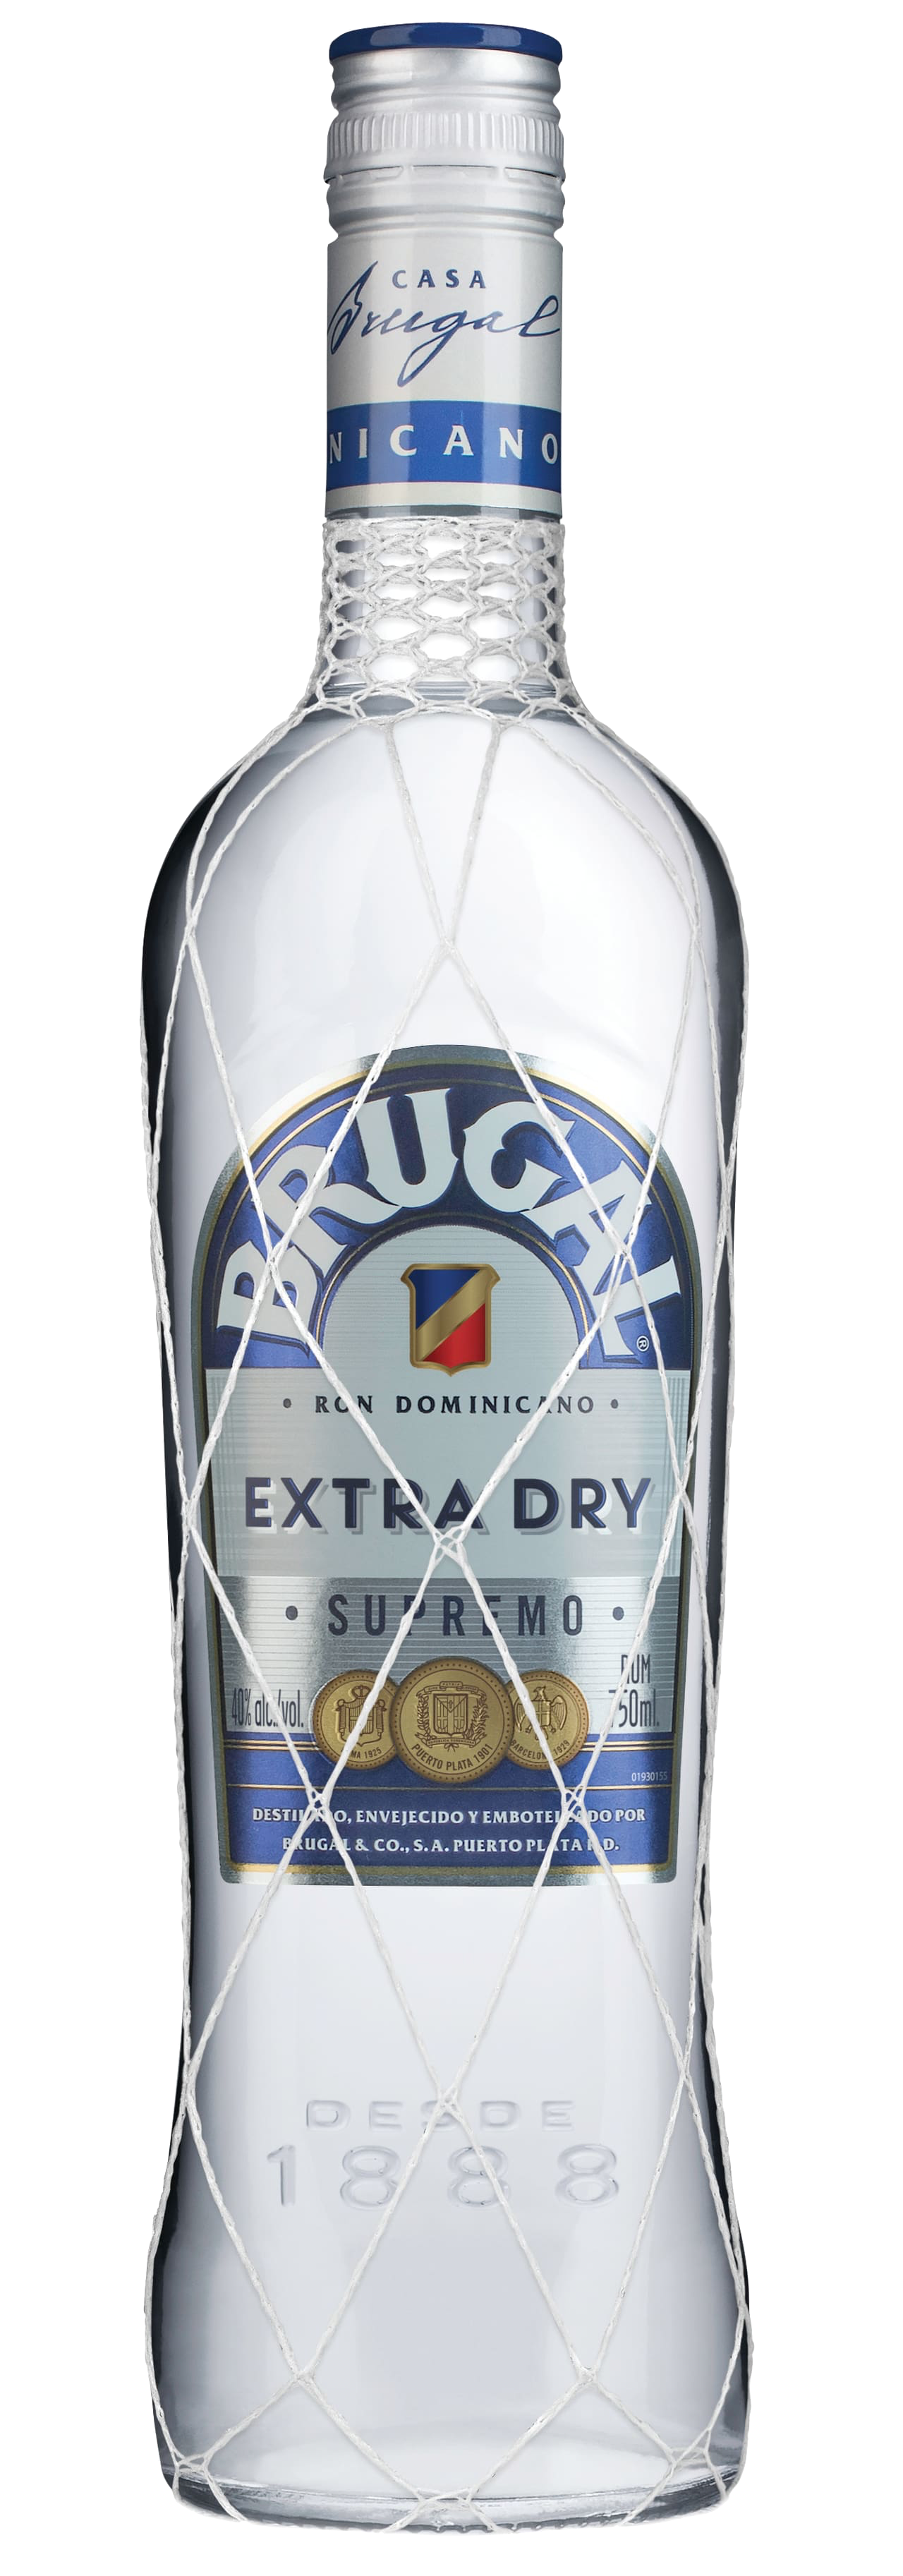 BRUGAL EXTRA DRY SUPREMO - Bk Wine Depot Corp